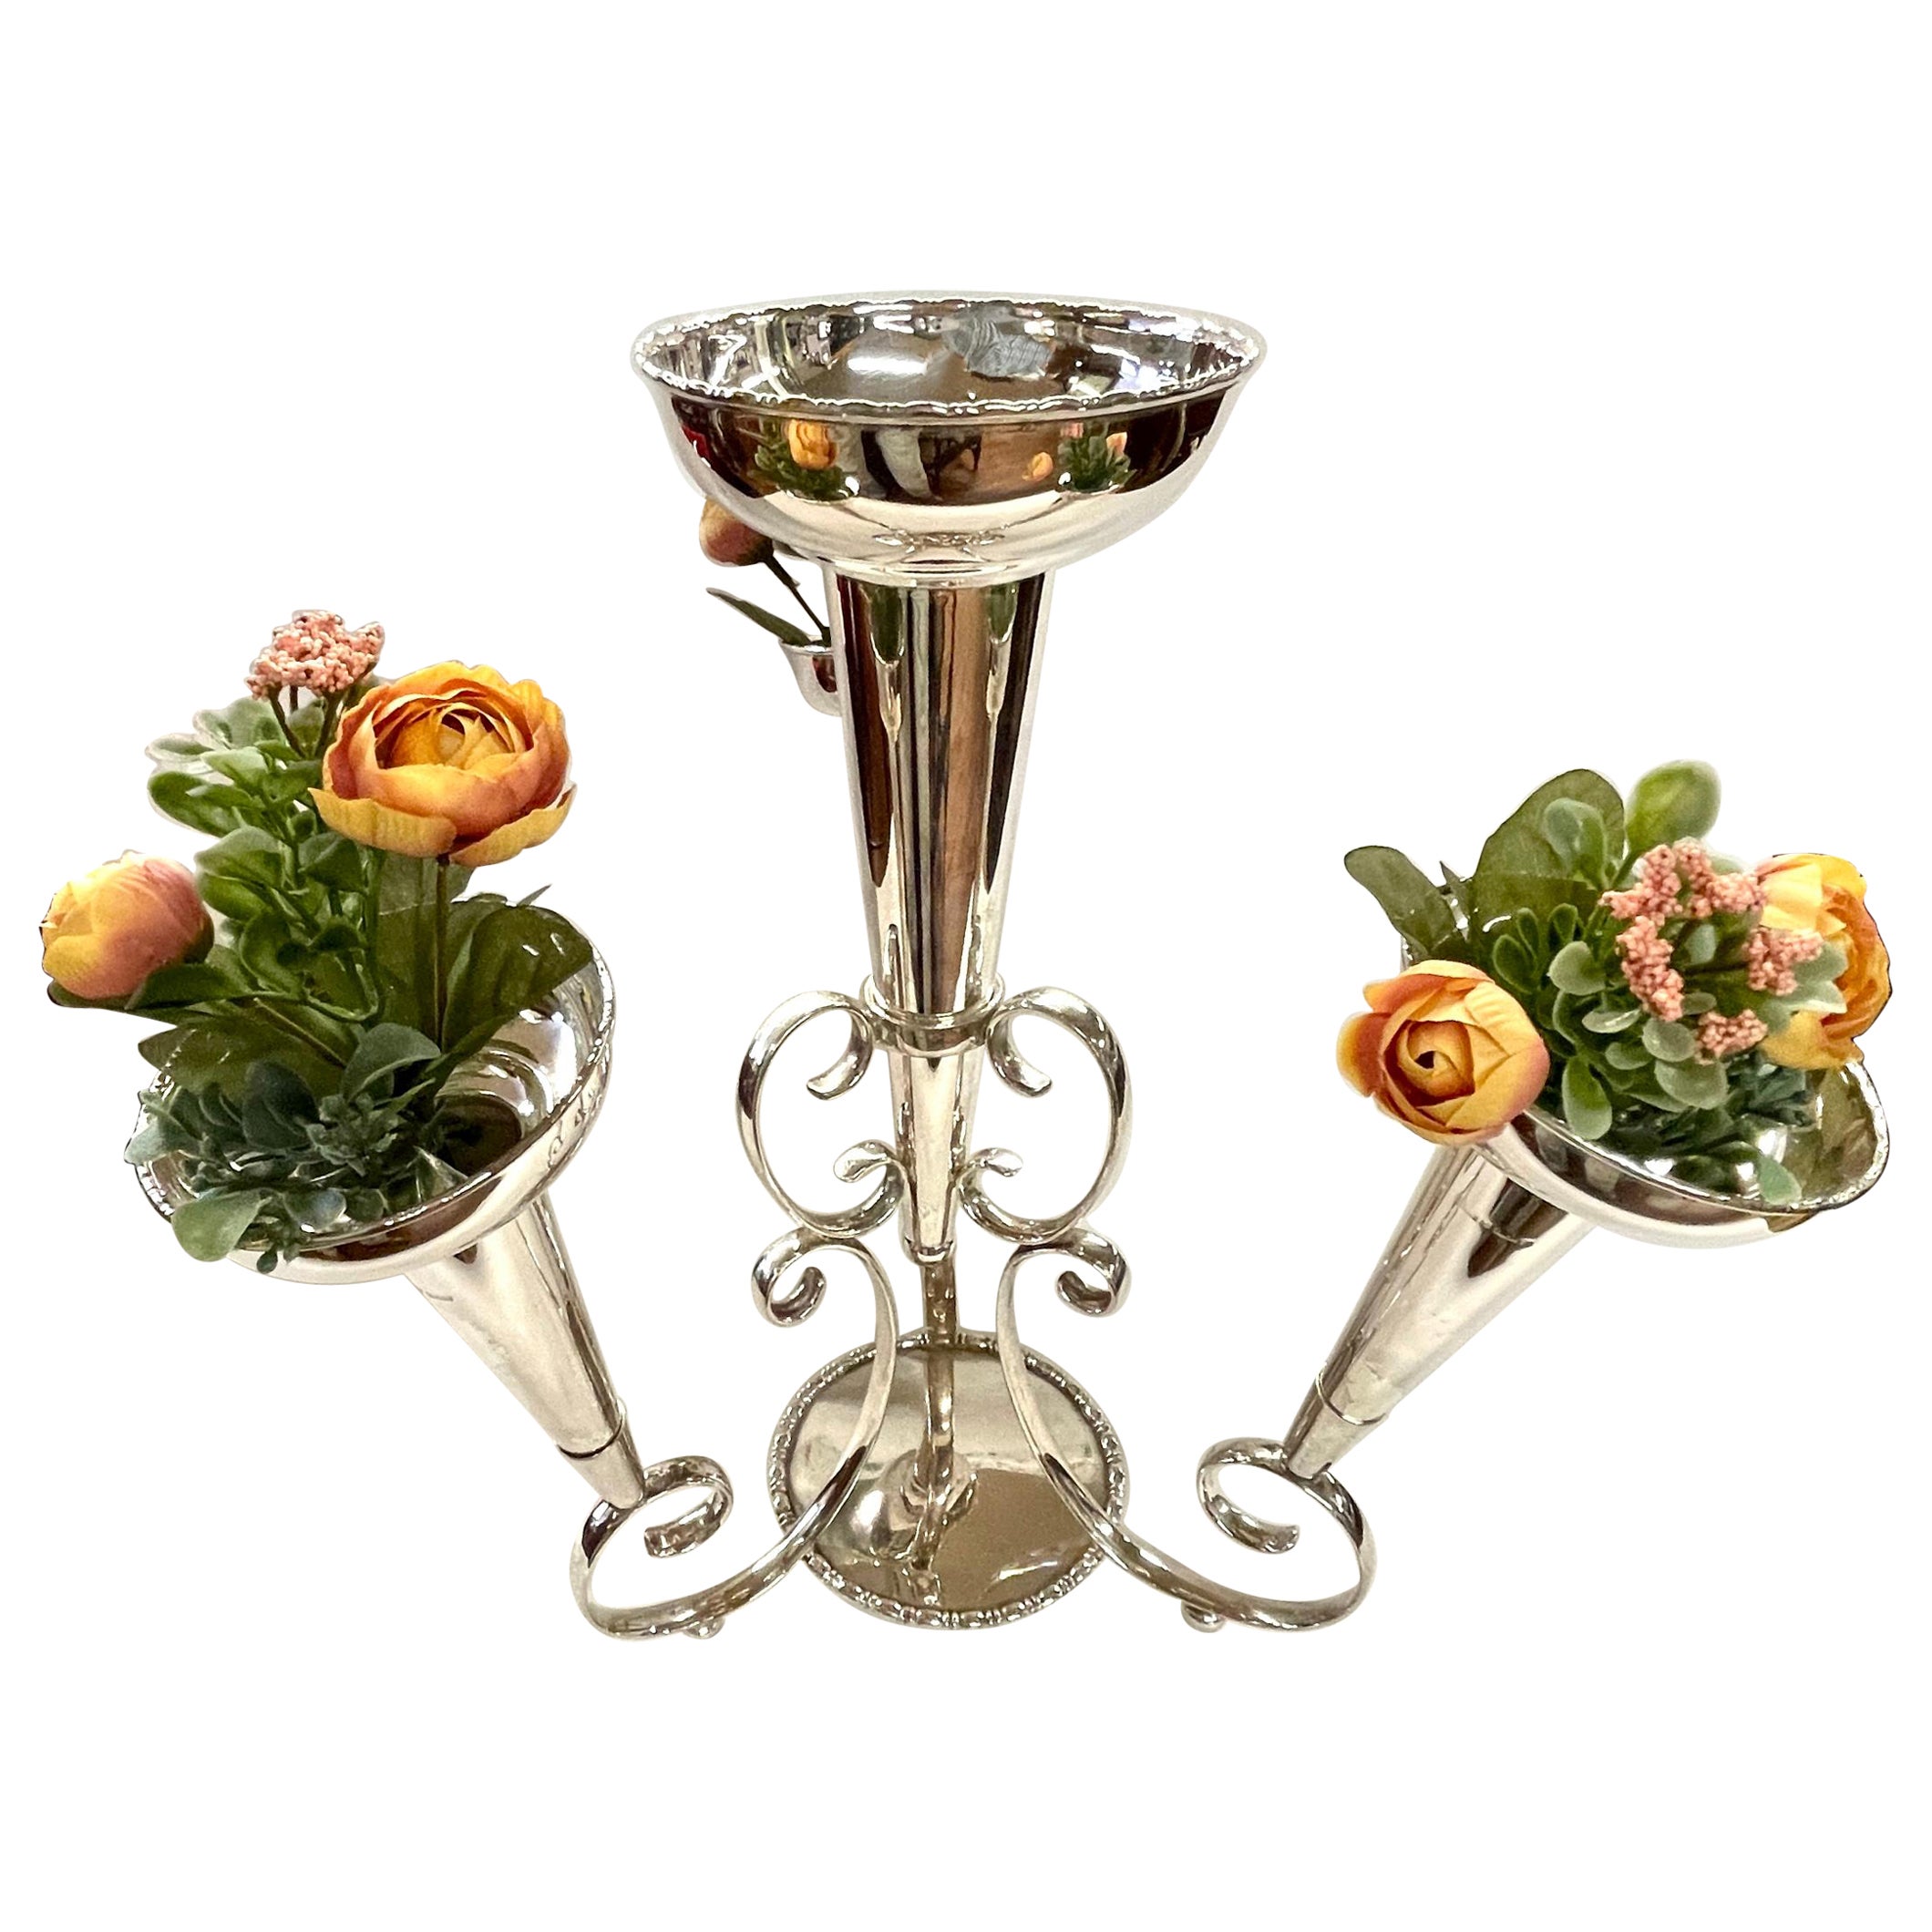 Superb Antique English Sheffield Silver Plate 4-Tube Floral Epergne Centerpiece For Sale